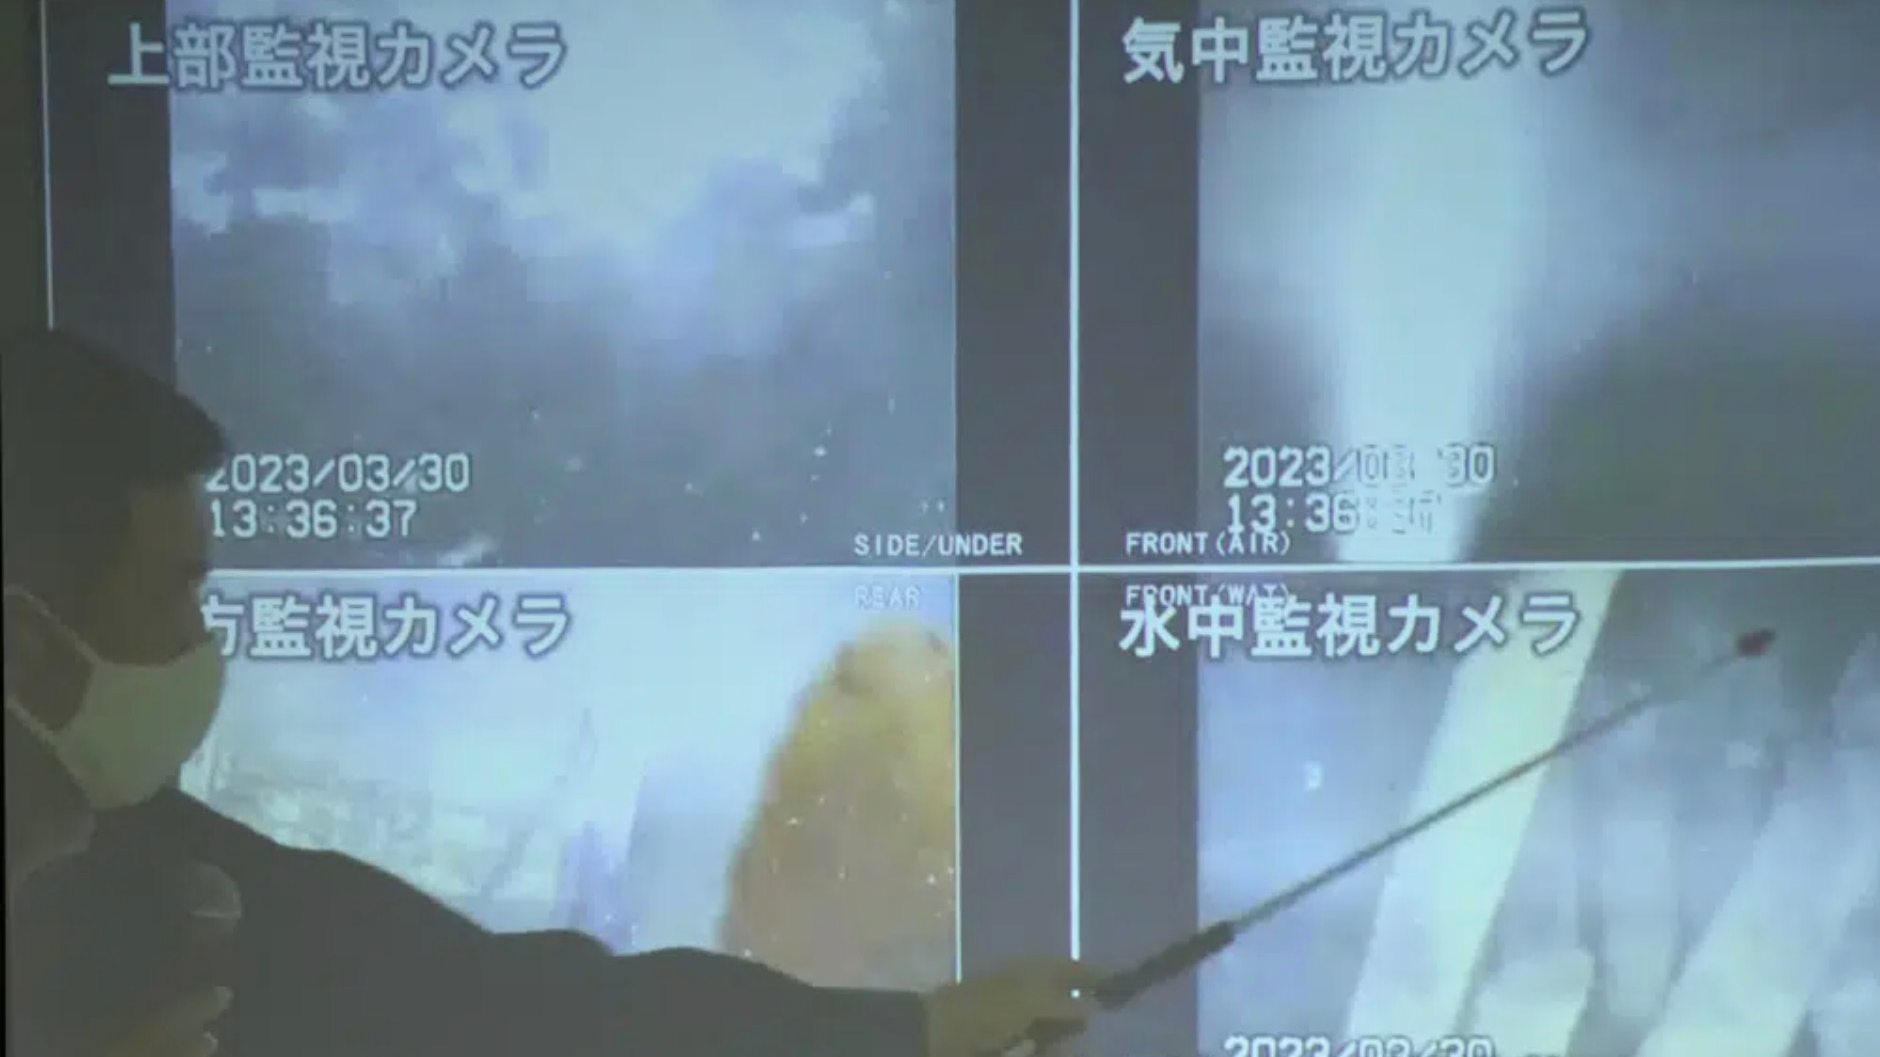 A spokesperson for the TEPCO shows photos captured by a robotic probe inside one of the three melted reactors at the tsunami-wrecked Fukushima nuclear power plant, during a news conference at the TEPCO headquarters in Tokyo, Japan, April 4, 2023. /CFP